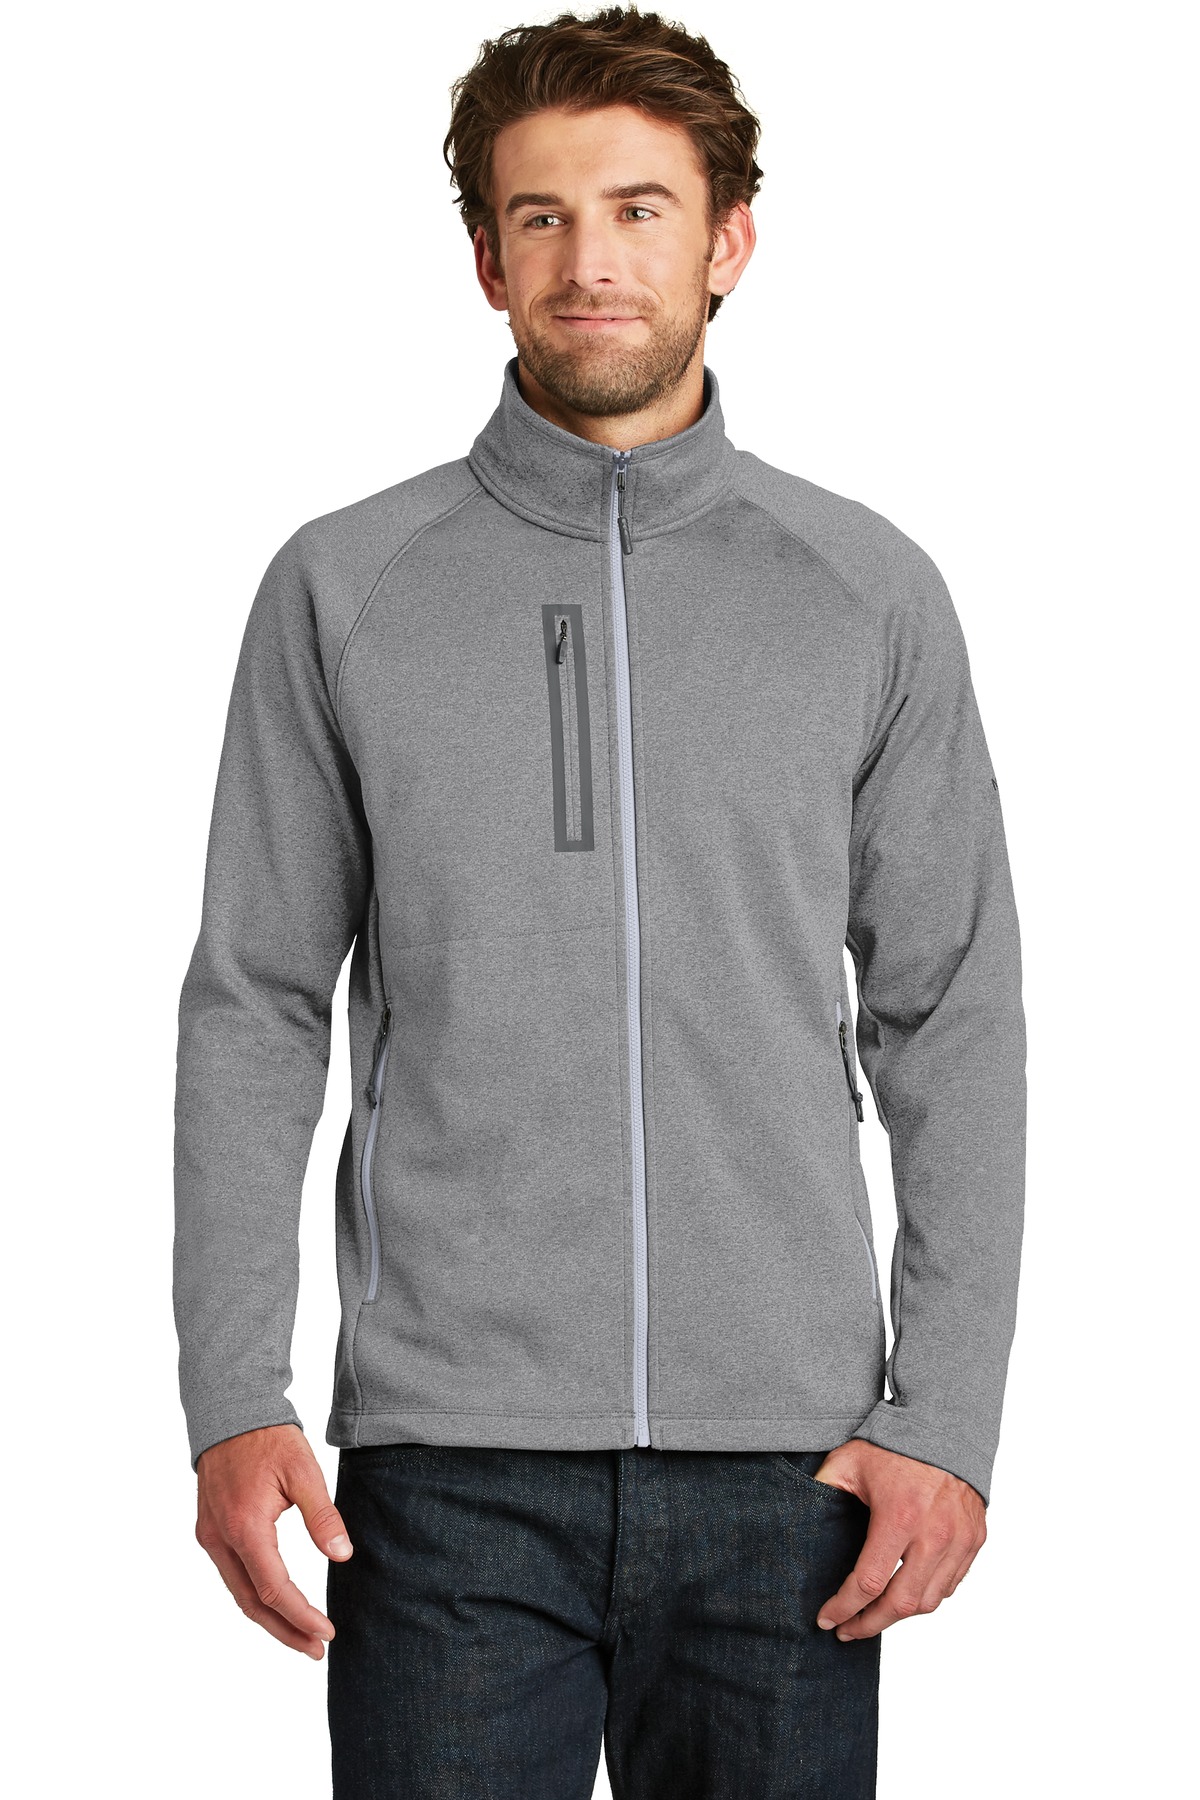 The North Face Canyon Flats Fleece Jacket-The North Face